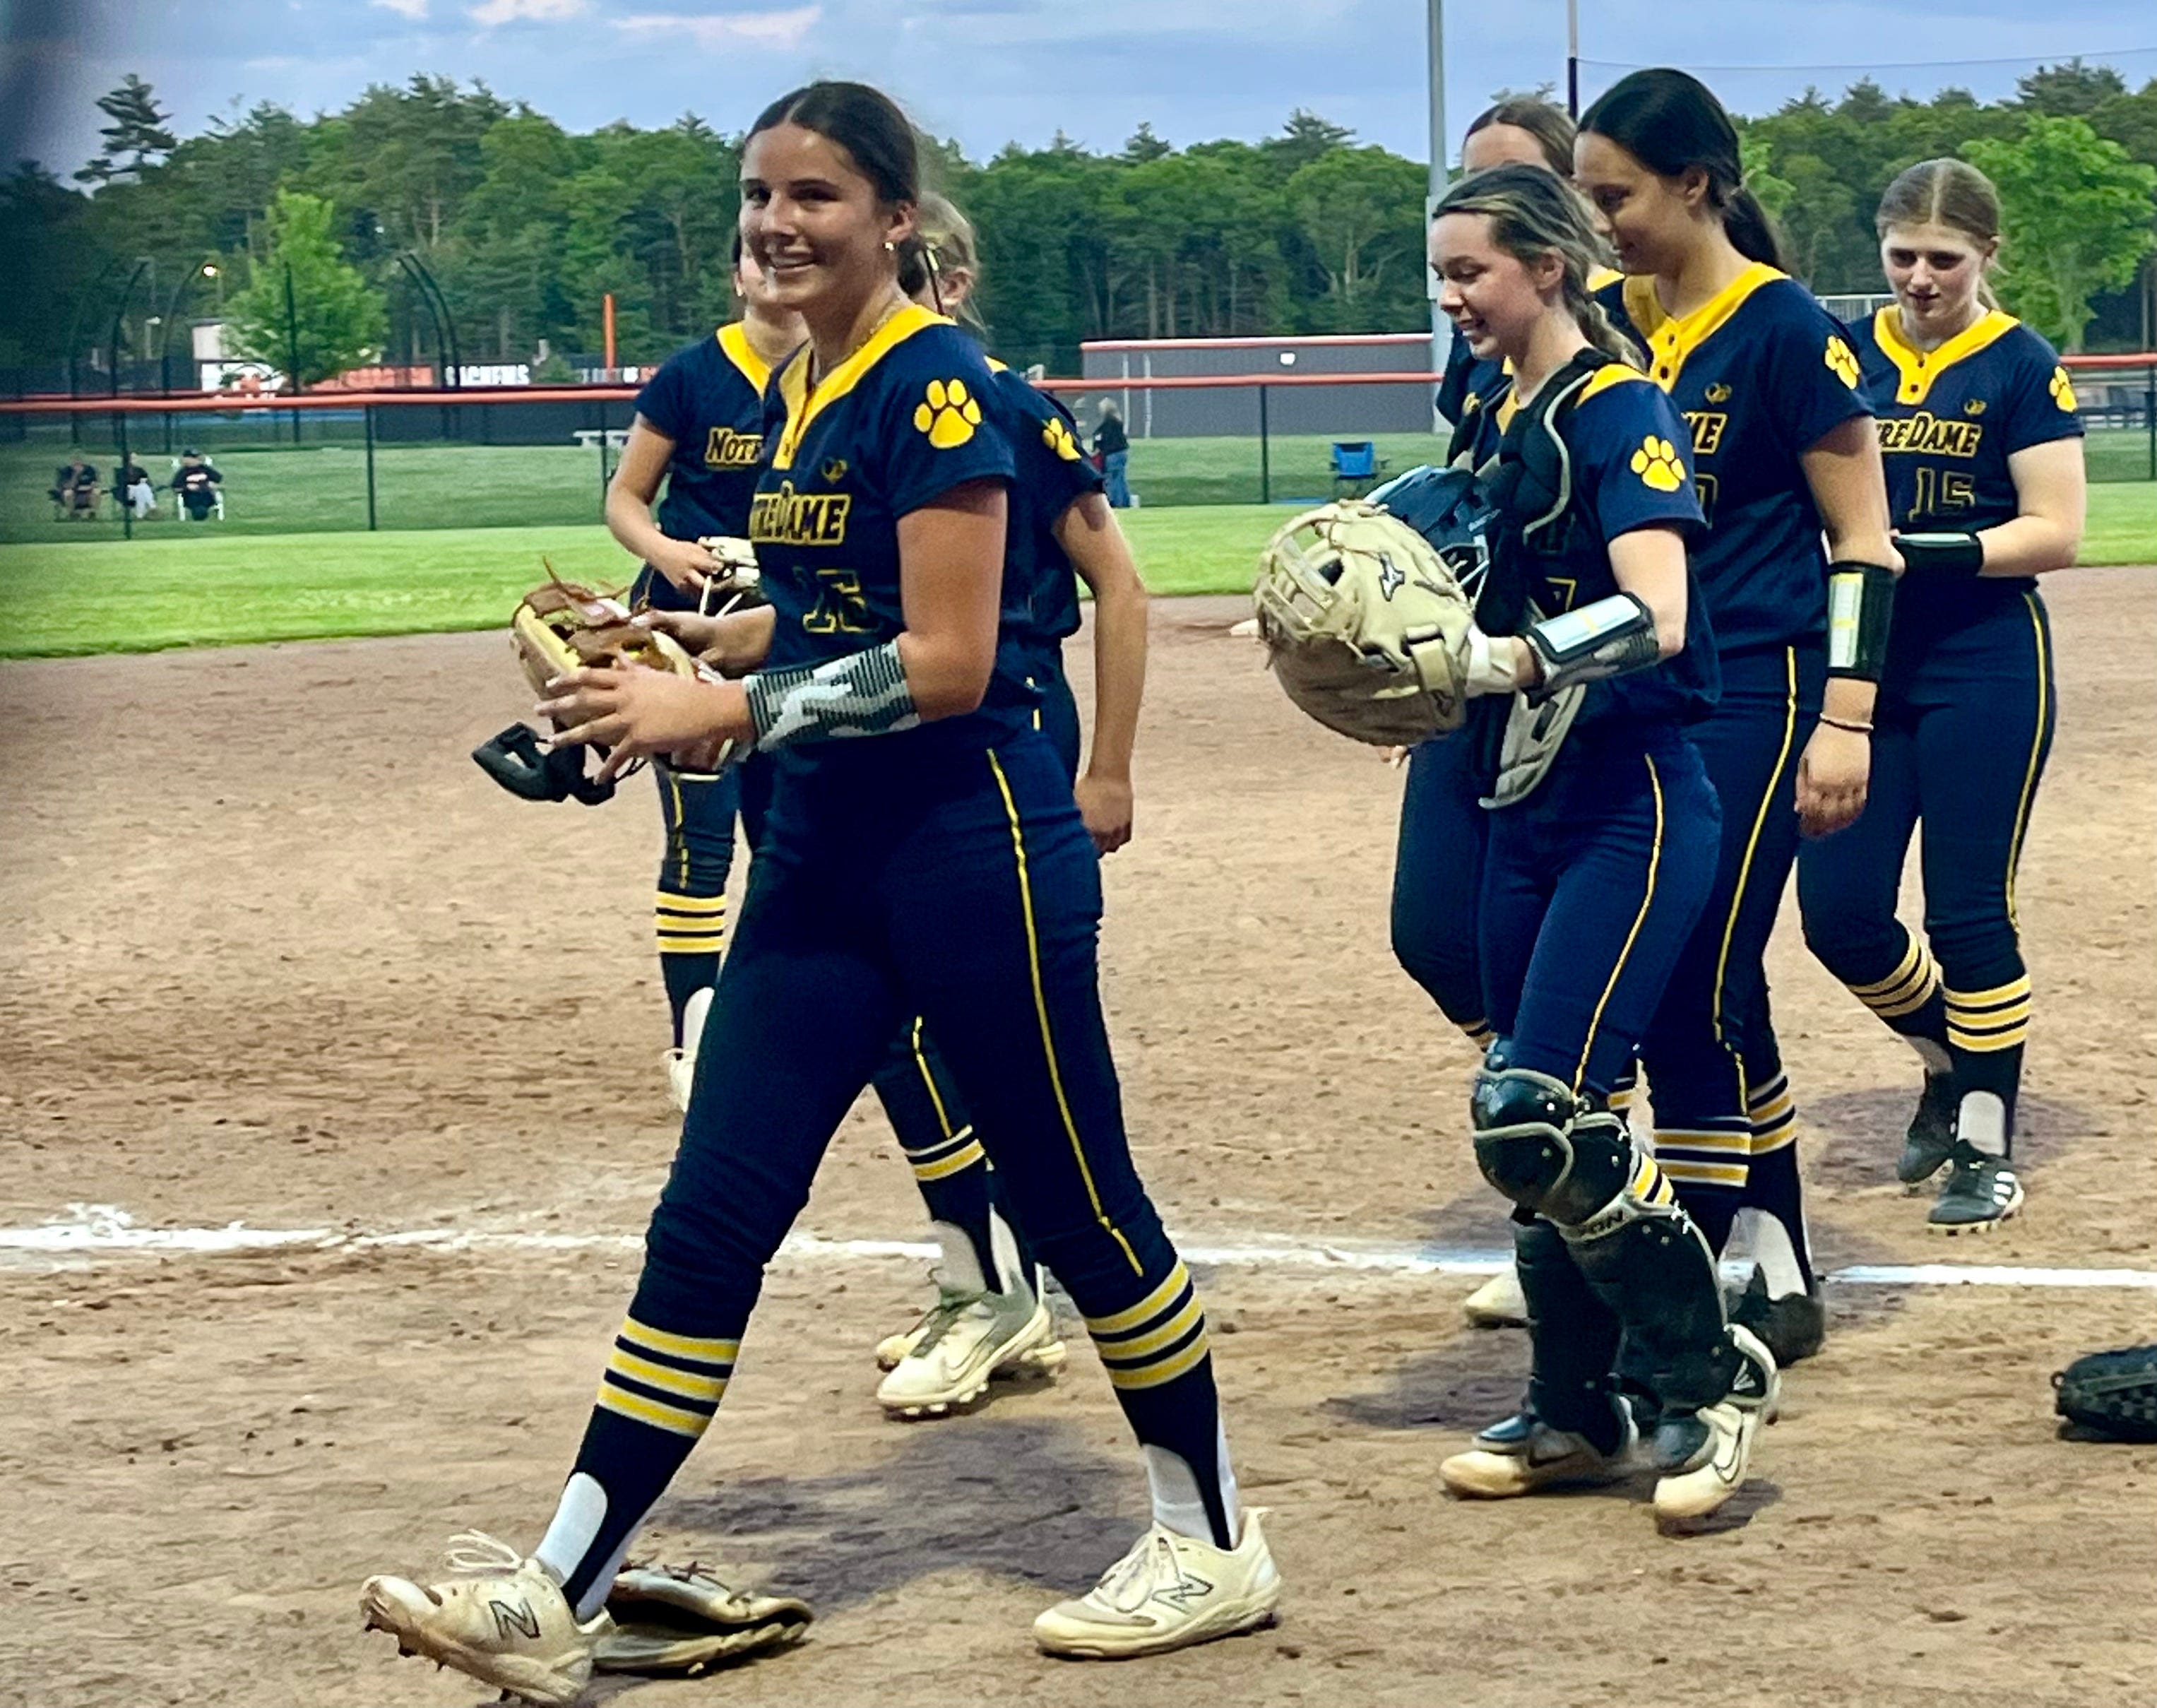 'It means the world': MacLeod's final chapter with NDA softball features upset tourney win